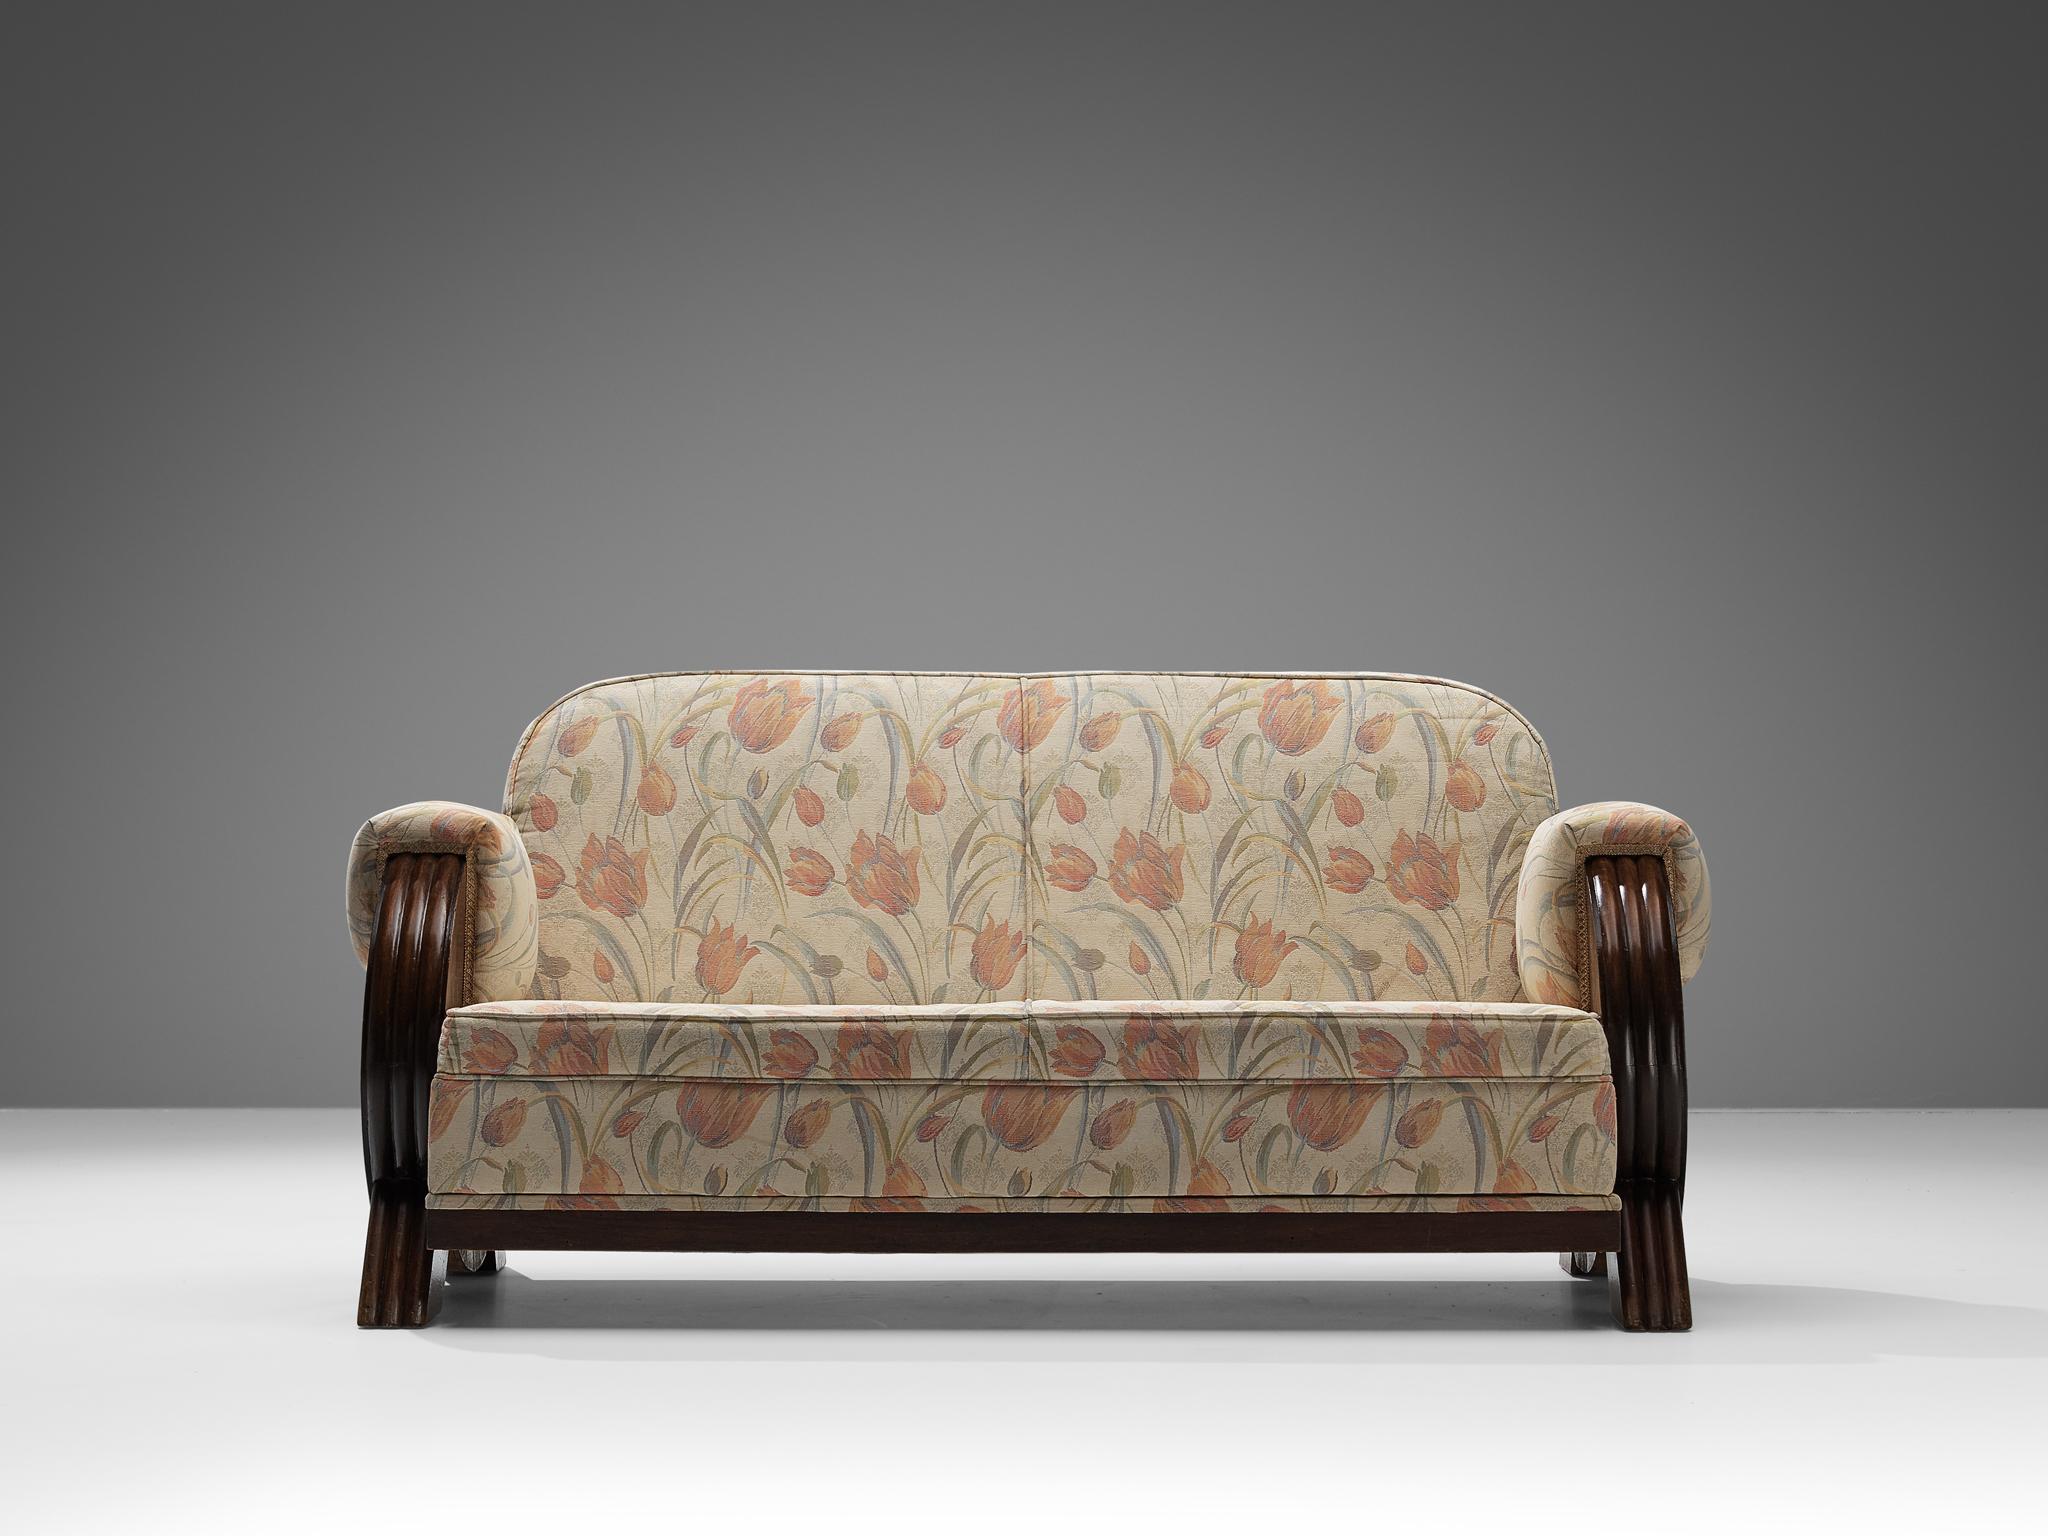 Sofa, fabric, stained beech, brass, Europe, 1940s

This exquisite sofa exudes the Art Deco style of the 1940s. With its imposing shapes, this design deserves a prominent place in one's interior. Truly exceptional about this piece are the largely